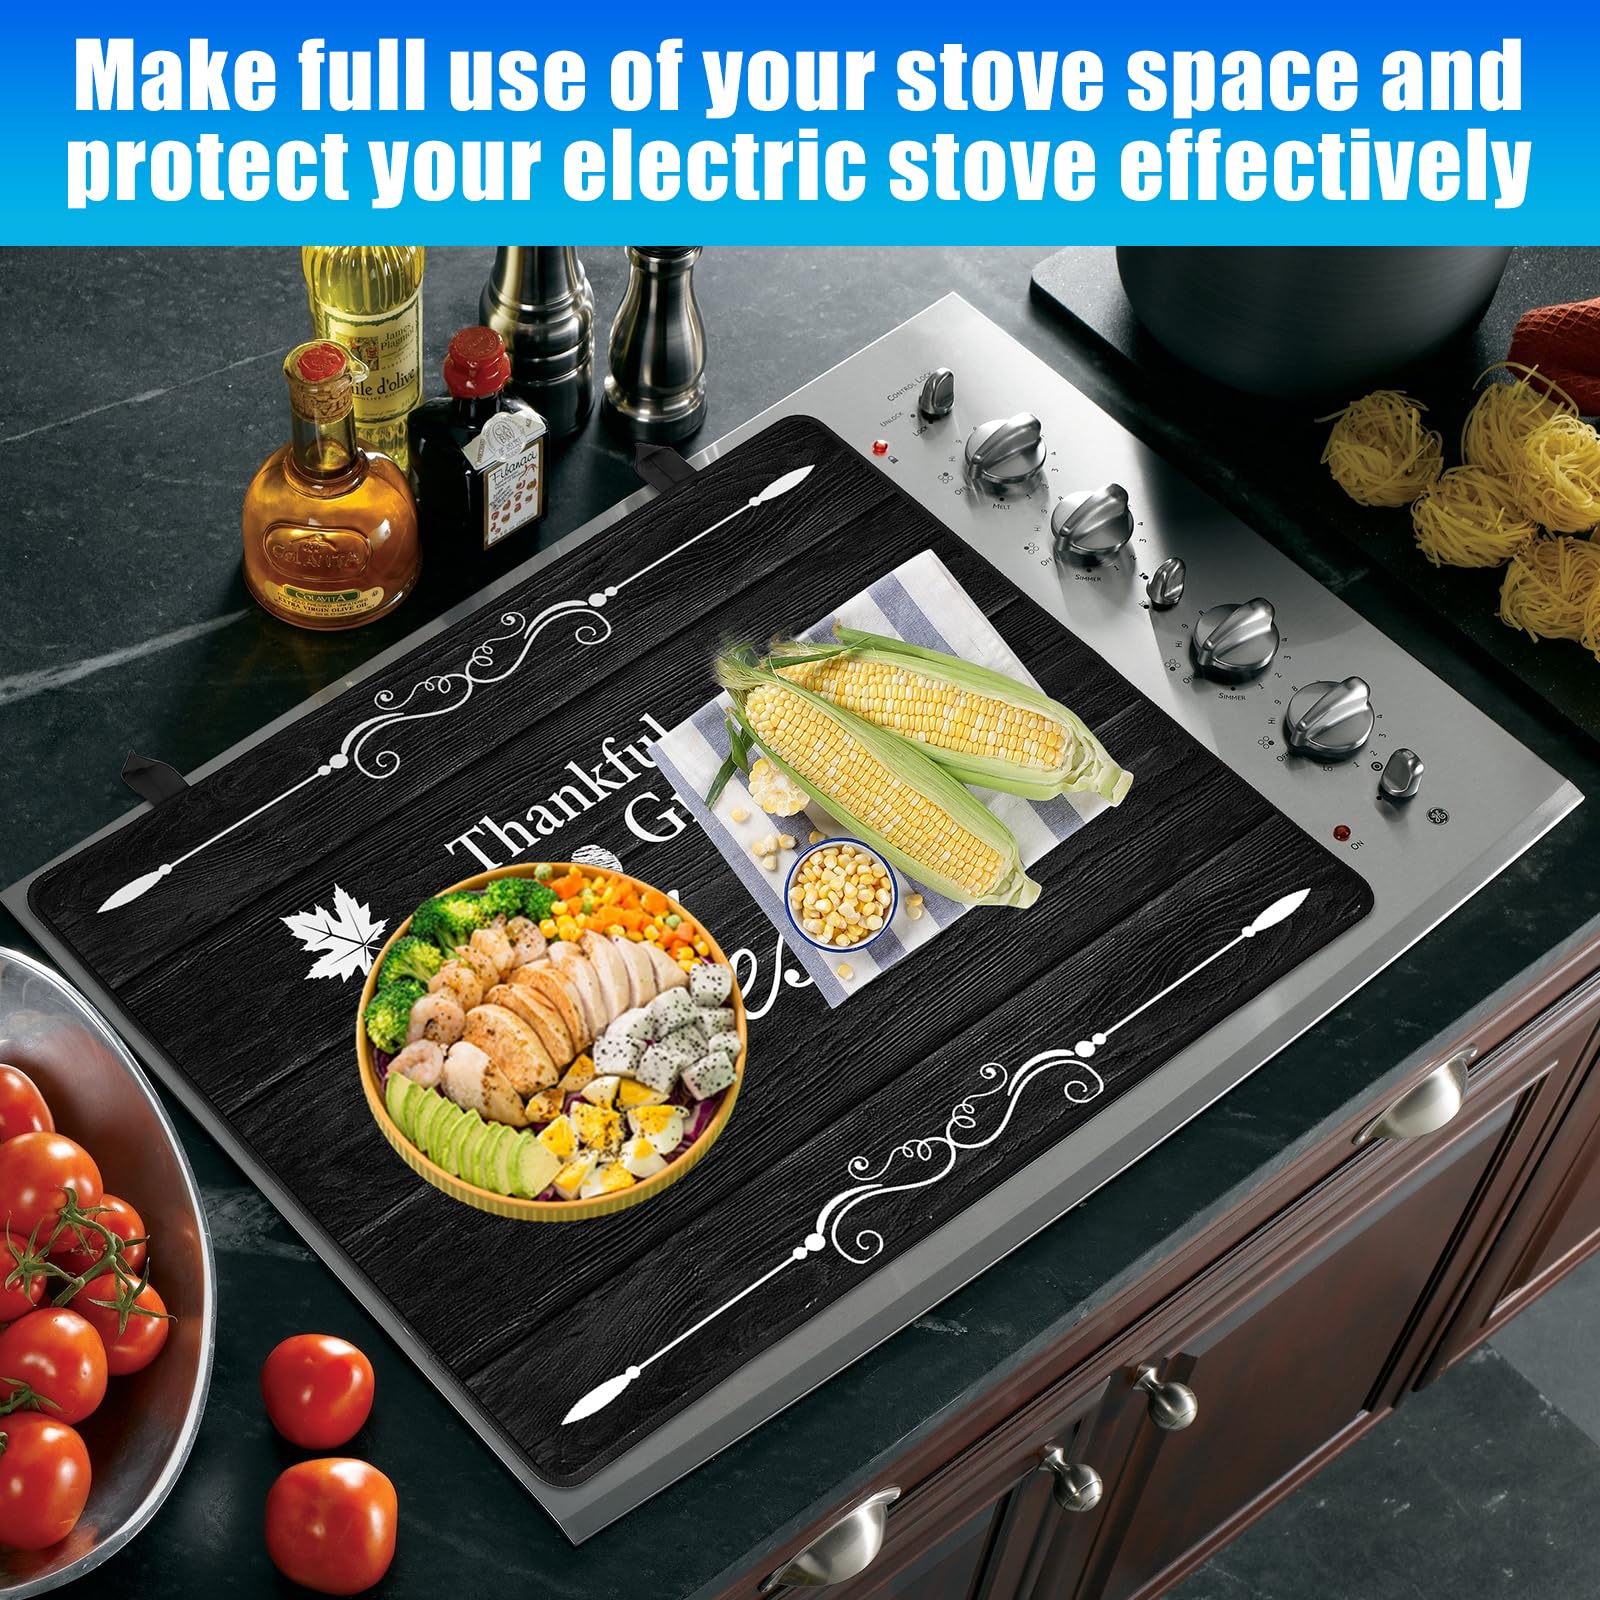 Stove Top Cover for Electric Stove (28.5”x 20.5”), Heat Resistant Glass Cooktop Cover, Multipurpose Stove/Counter/Washer Top Protector, Dishwasher Safe Natural Rubber (Thankful)